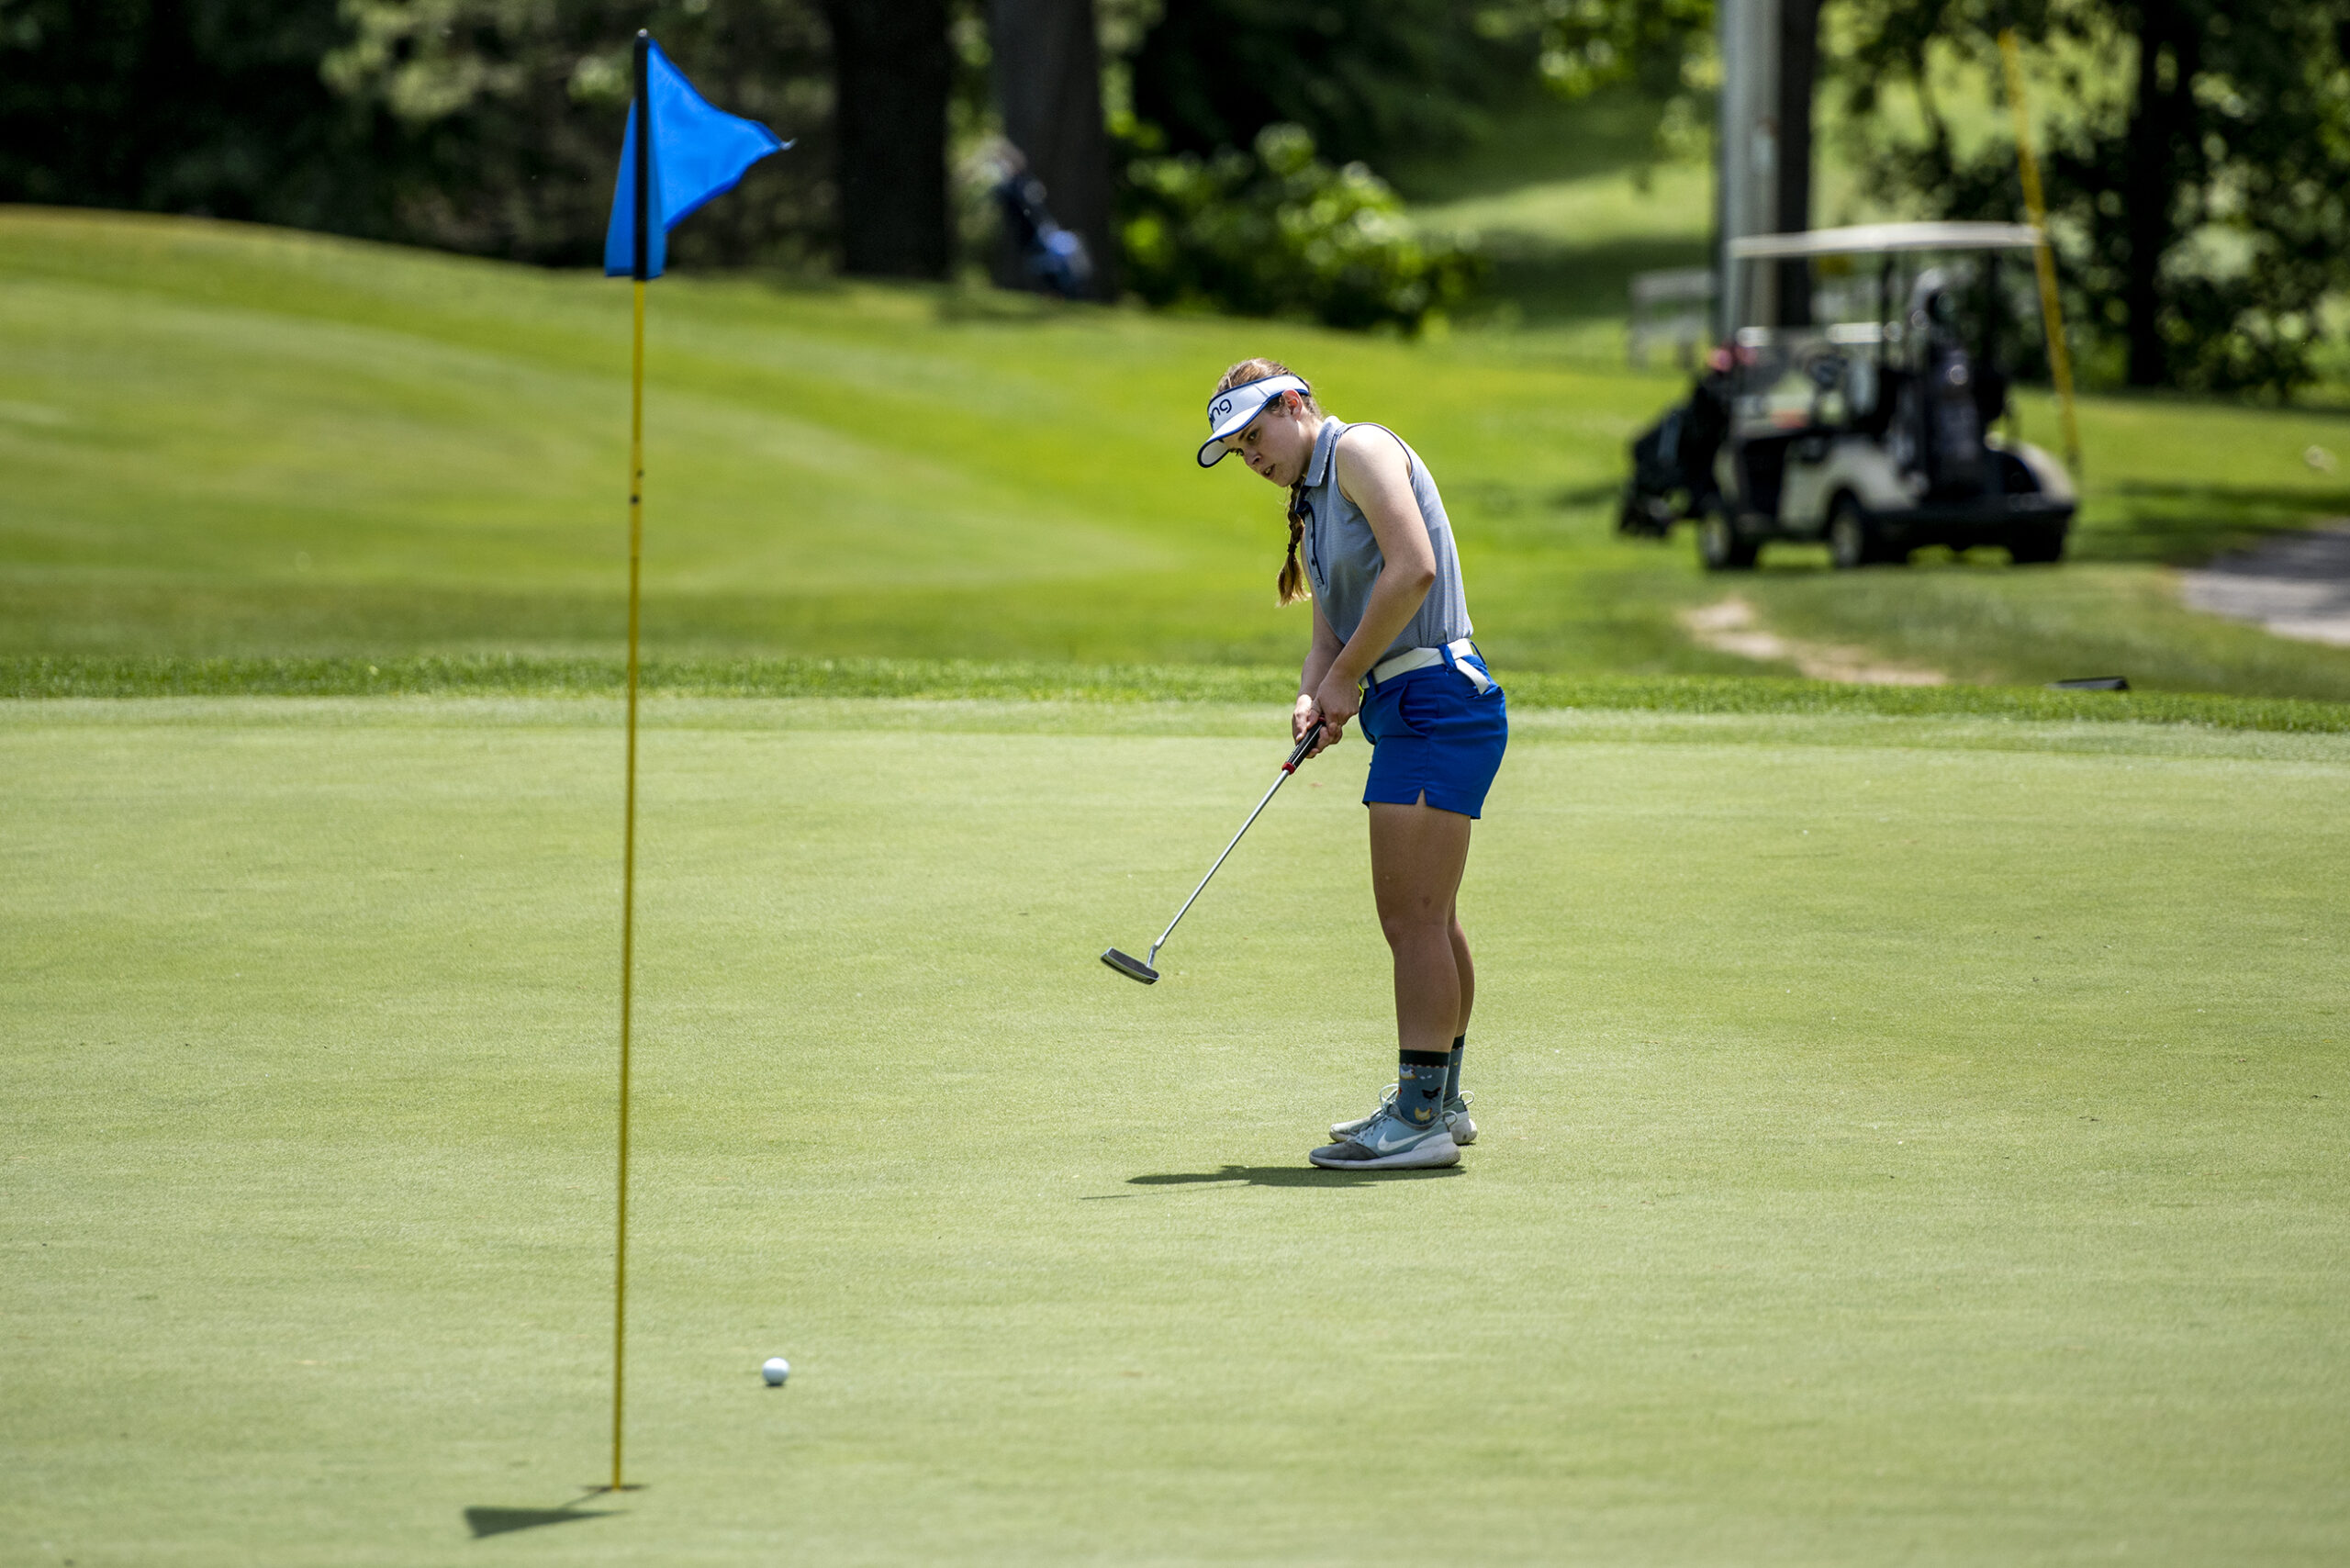 A girl watches as her ball rolls toward a hole marked with a blue flag.